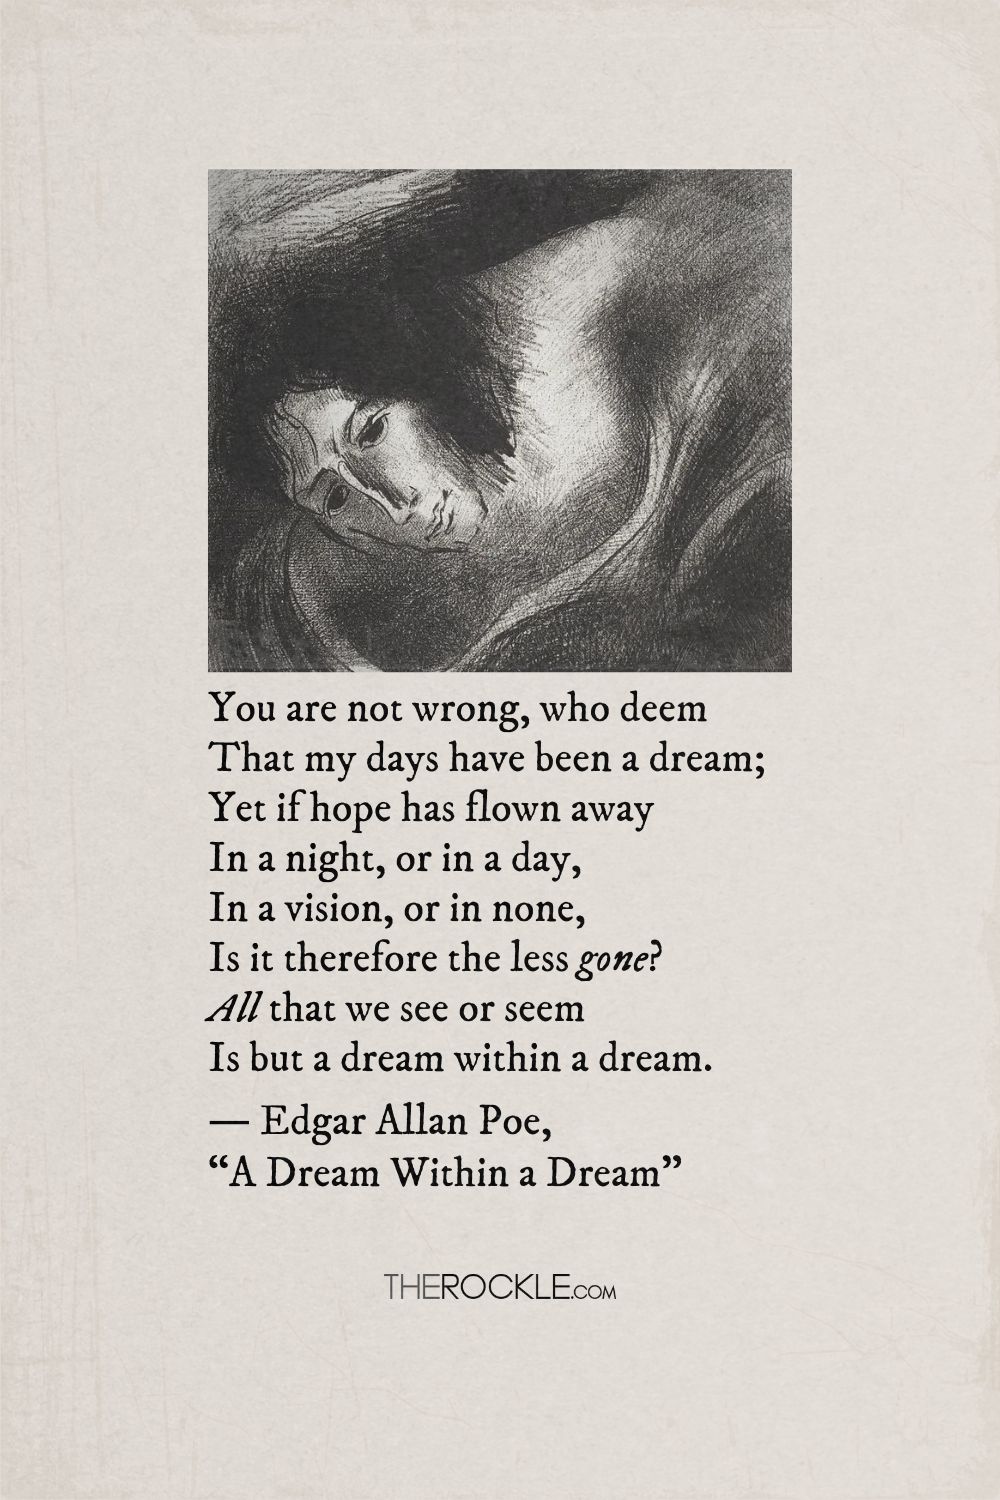 Edgar Allan Poe's quote from the poem A Dream Within a Dream